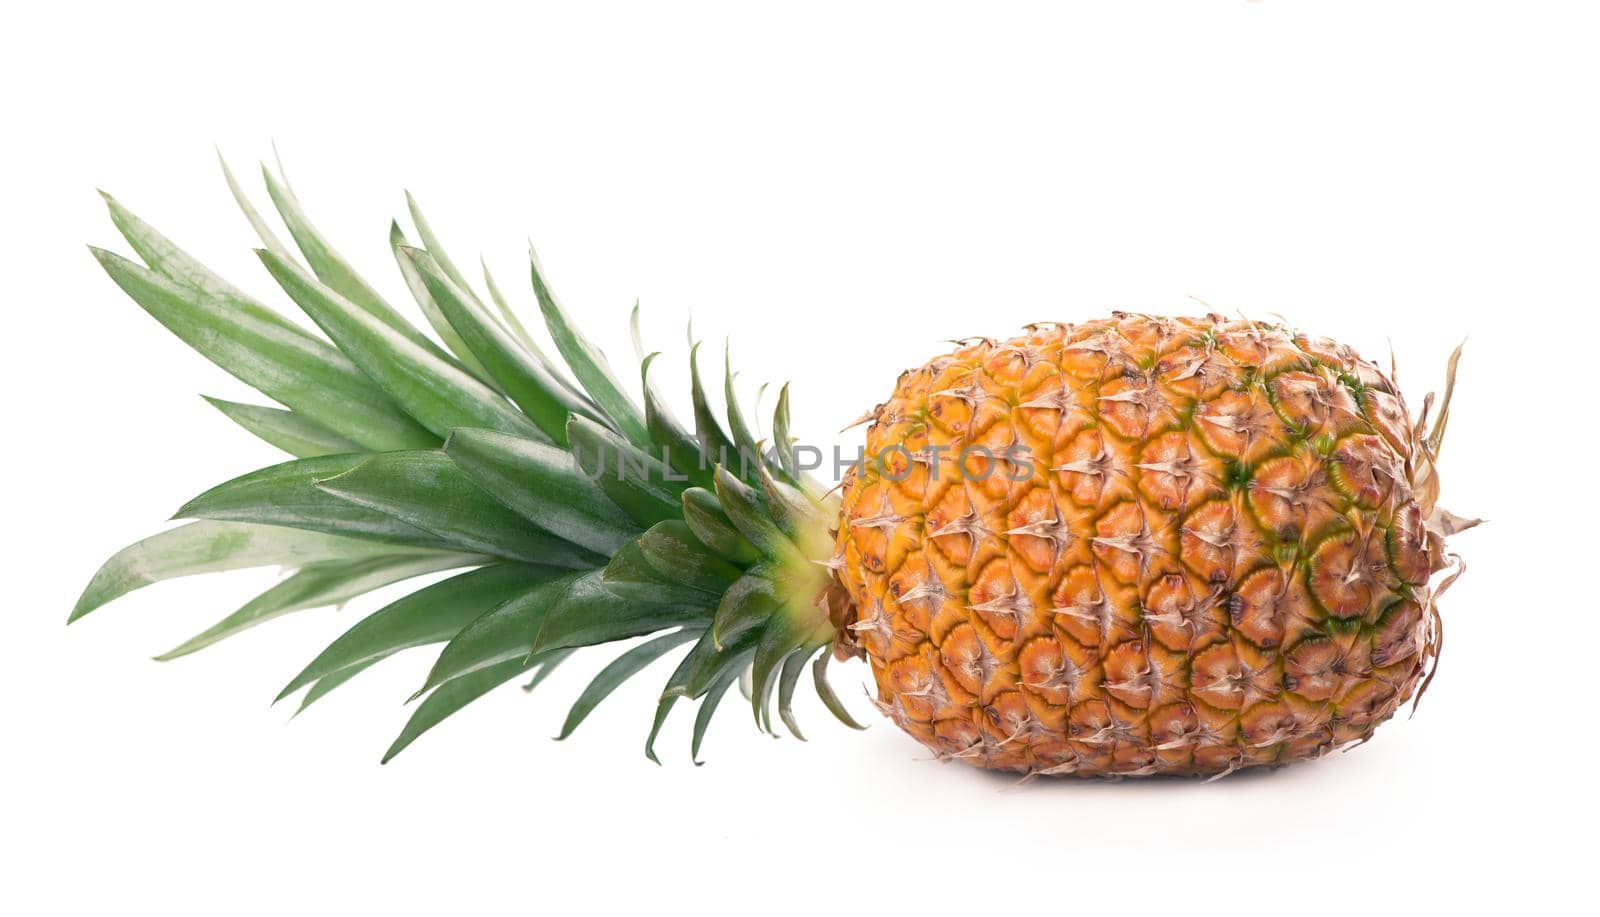 Ripe whole pineapple isolated on white.